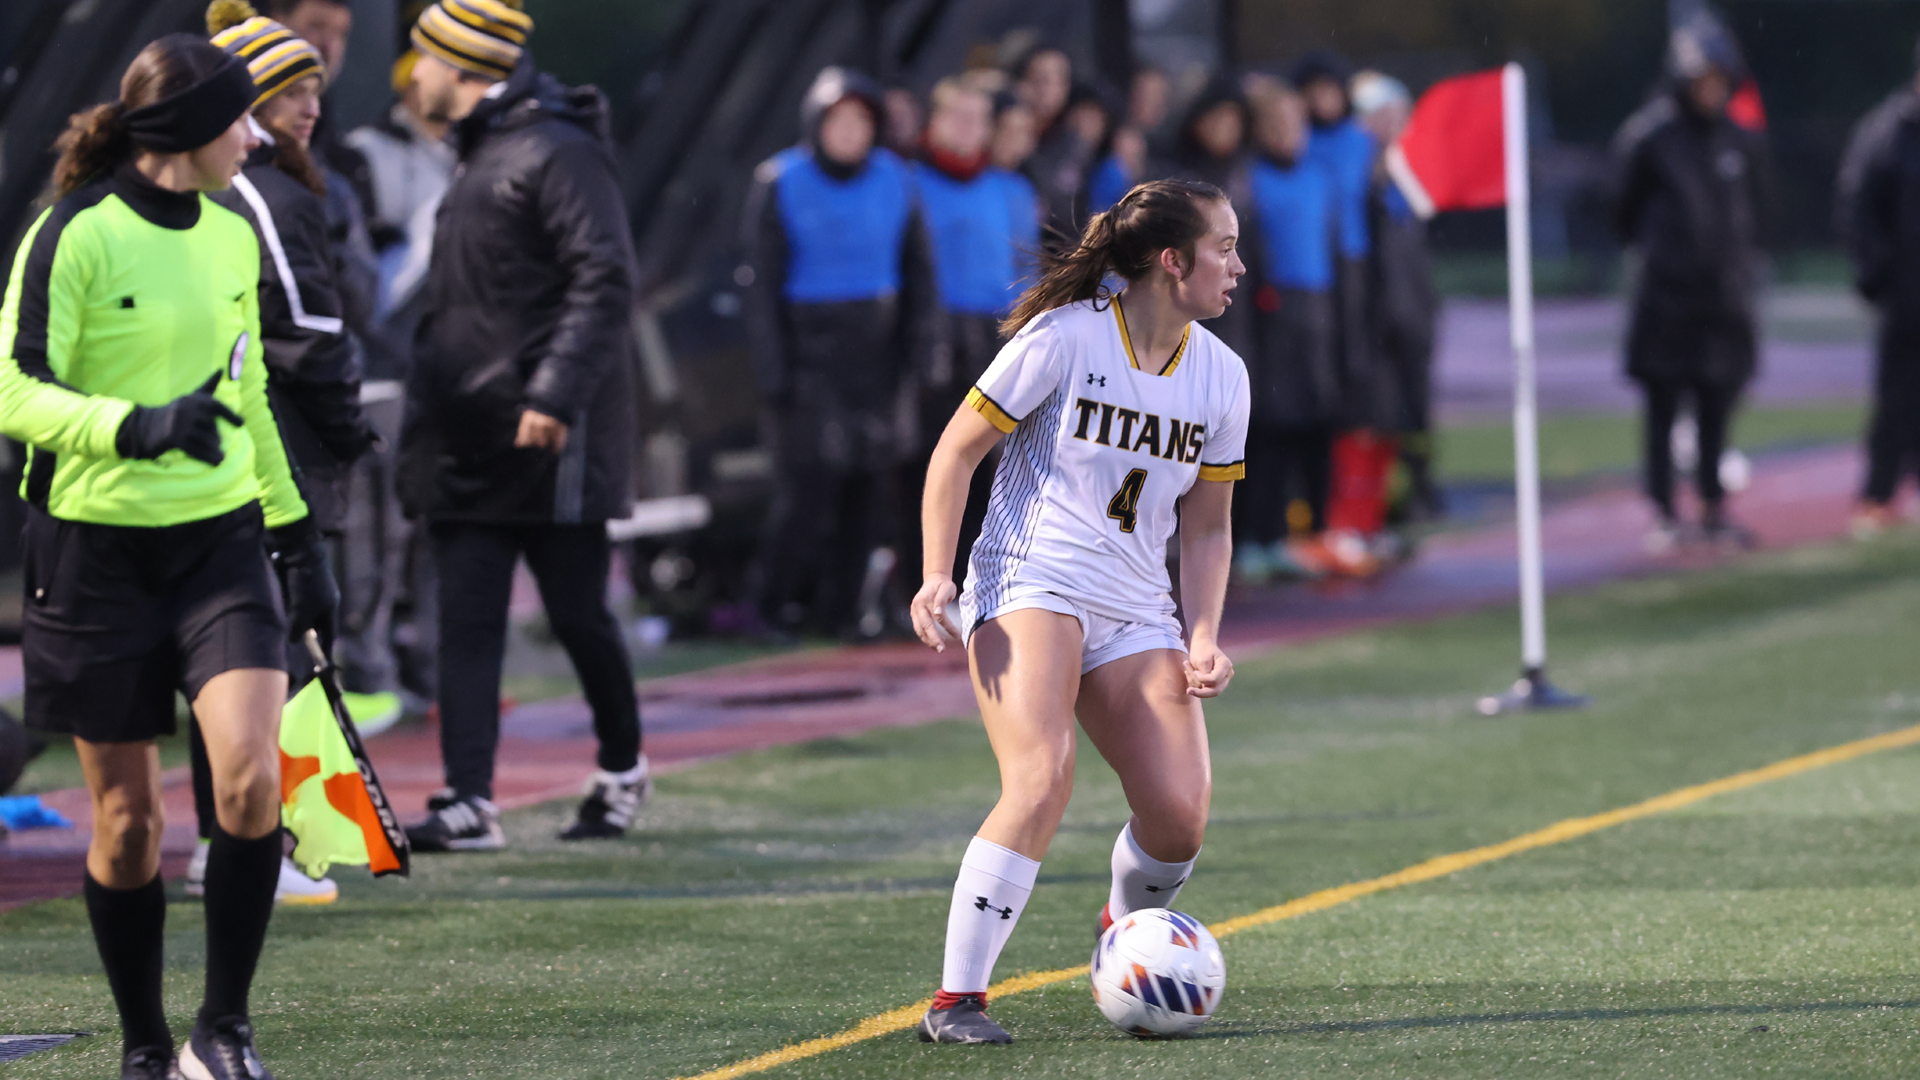 Rylie Kaufmann scored her fourth goal of the season in the Titans' regular season finale